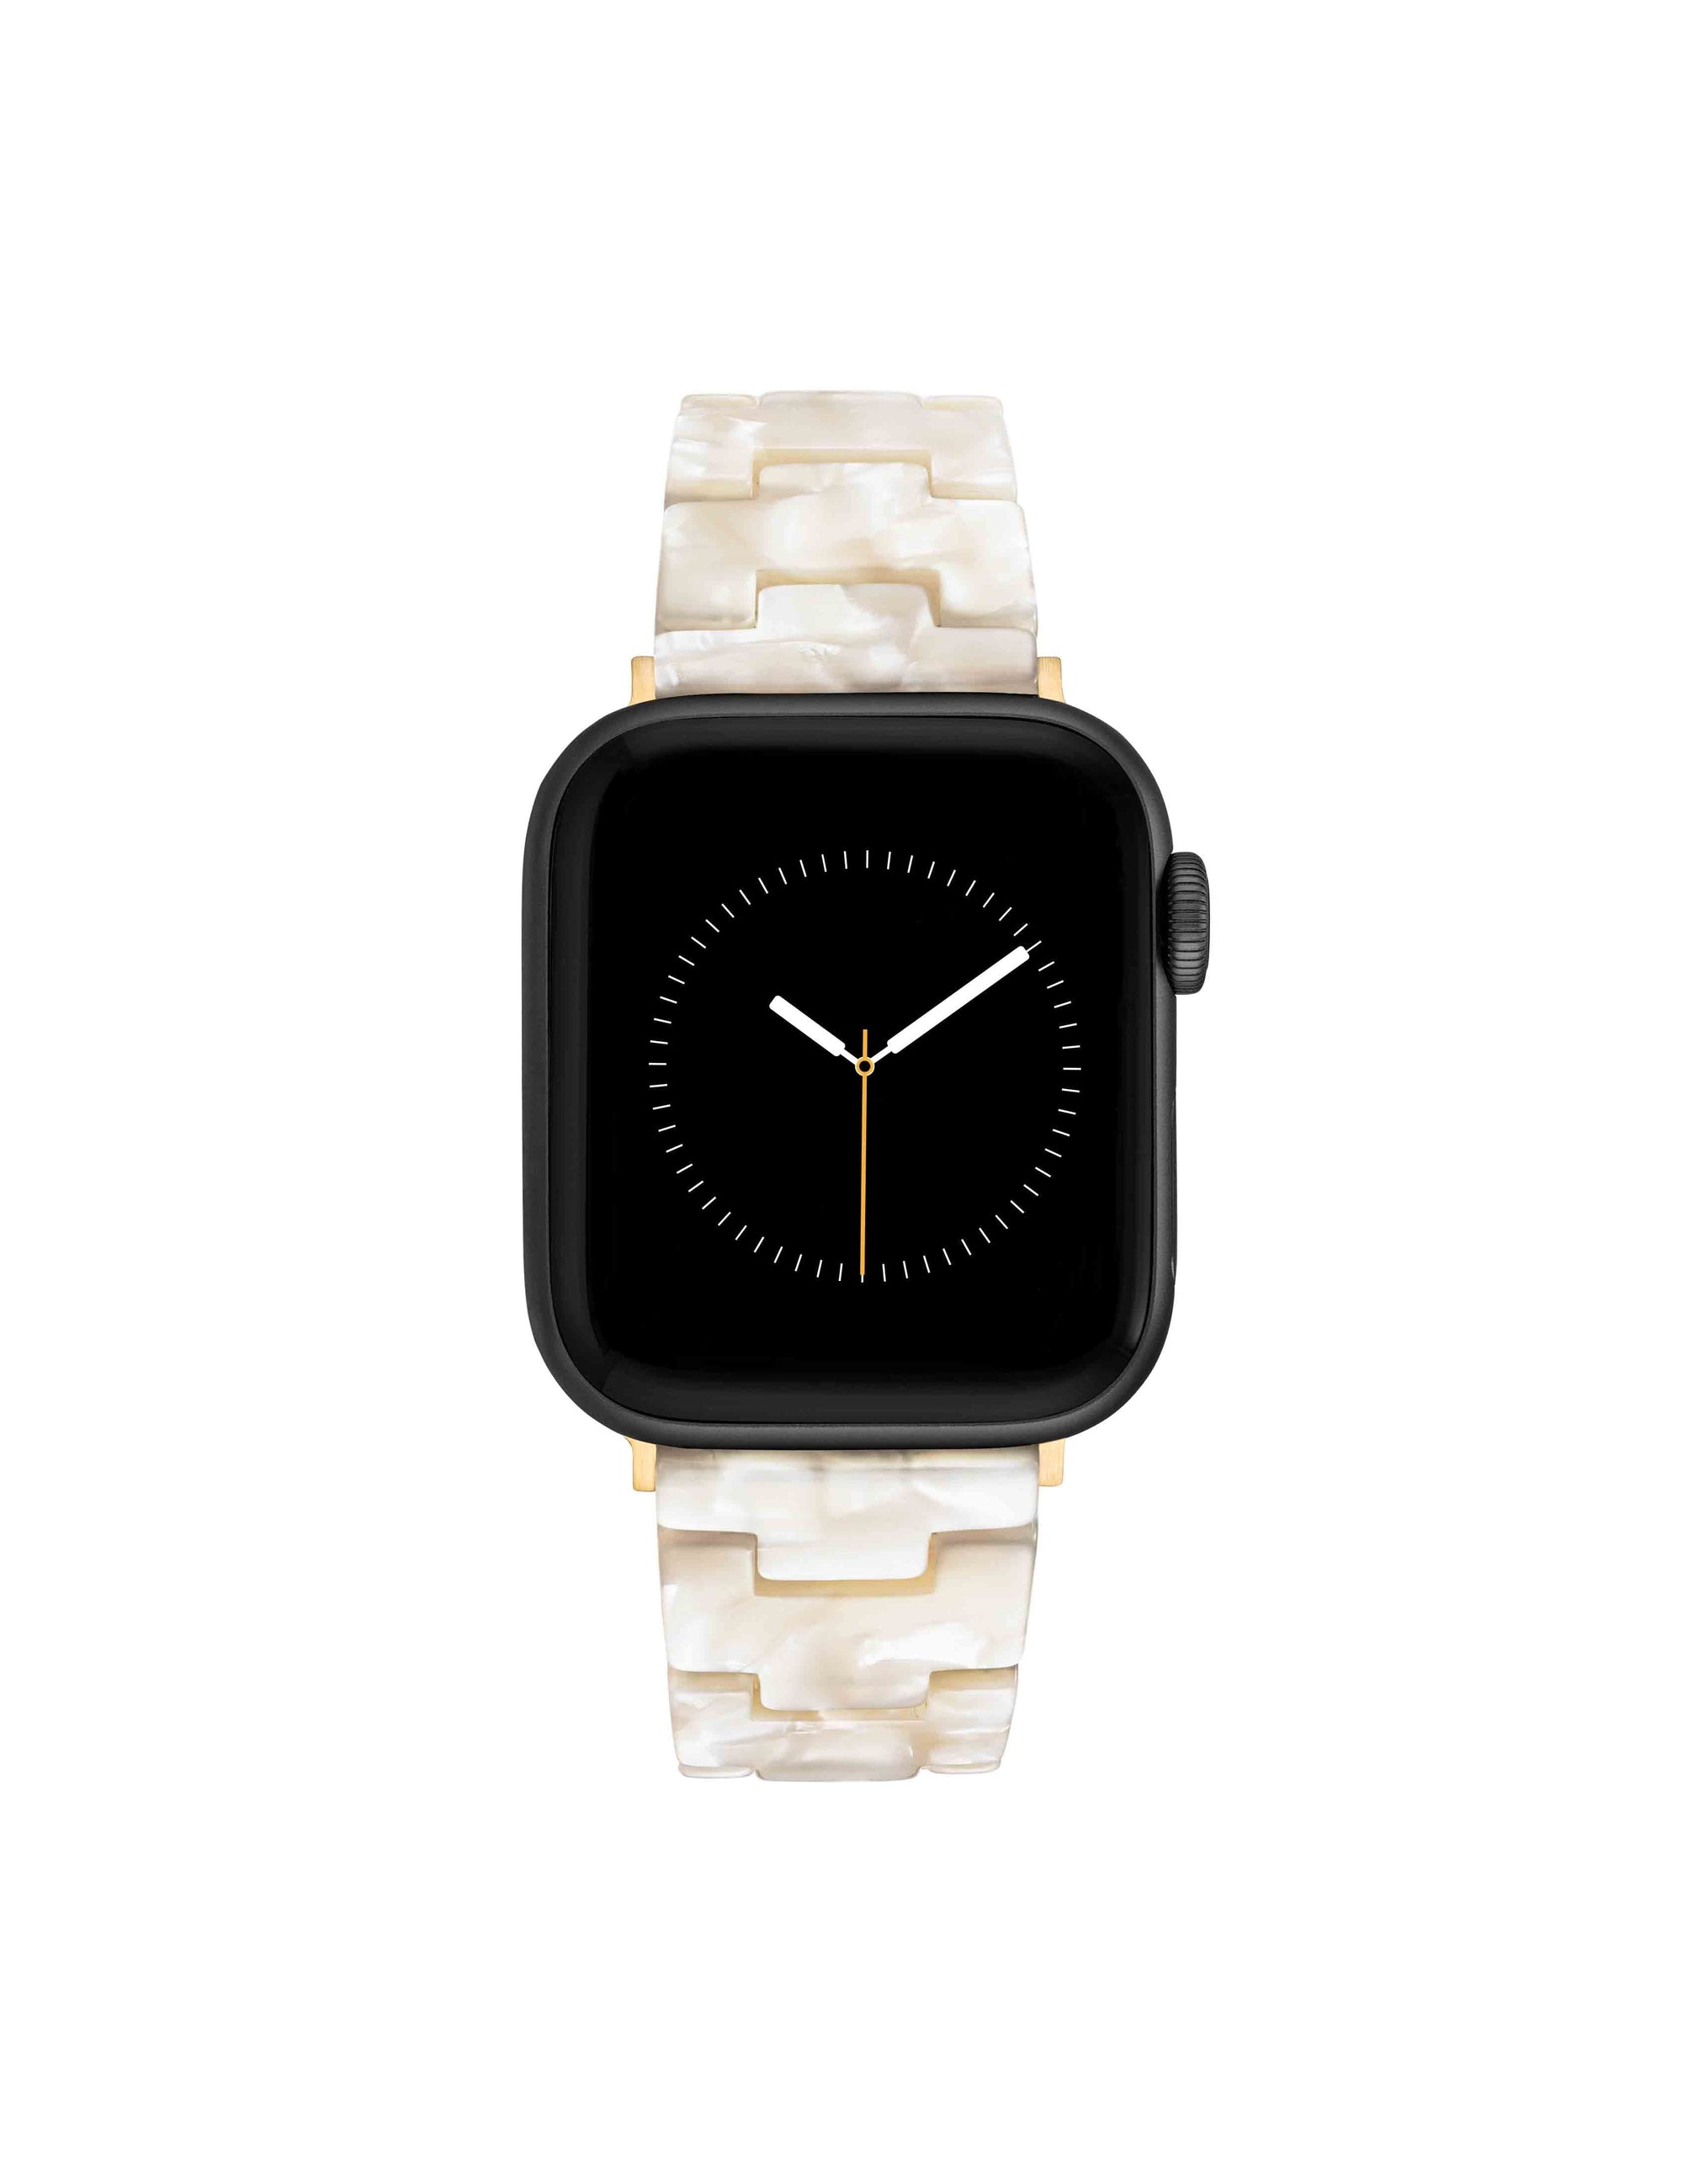 Basketweave Stainless Steel Band for the Apple Watch – Goldenerre